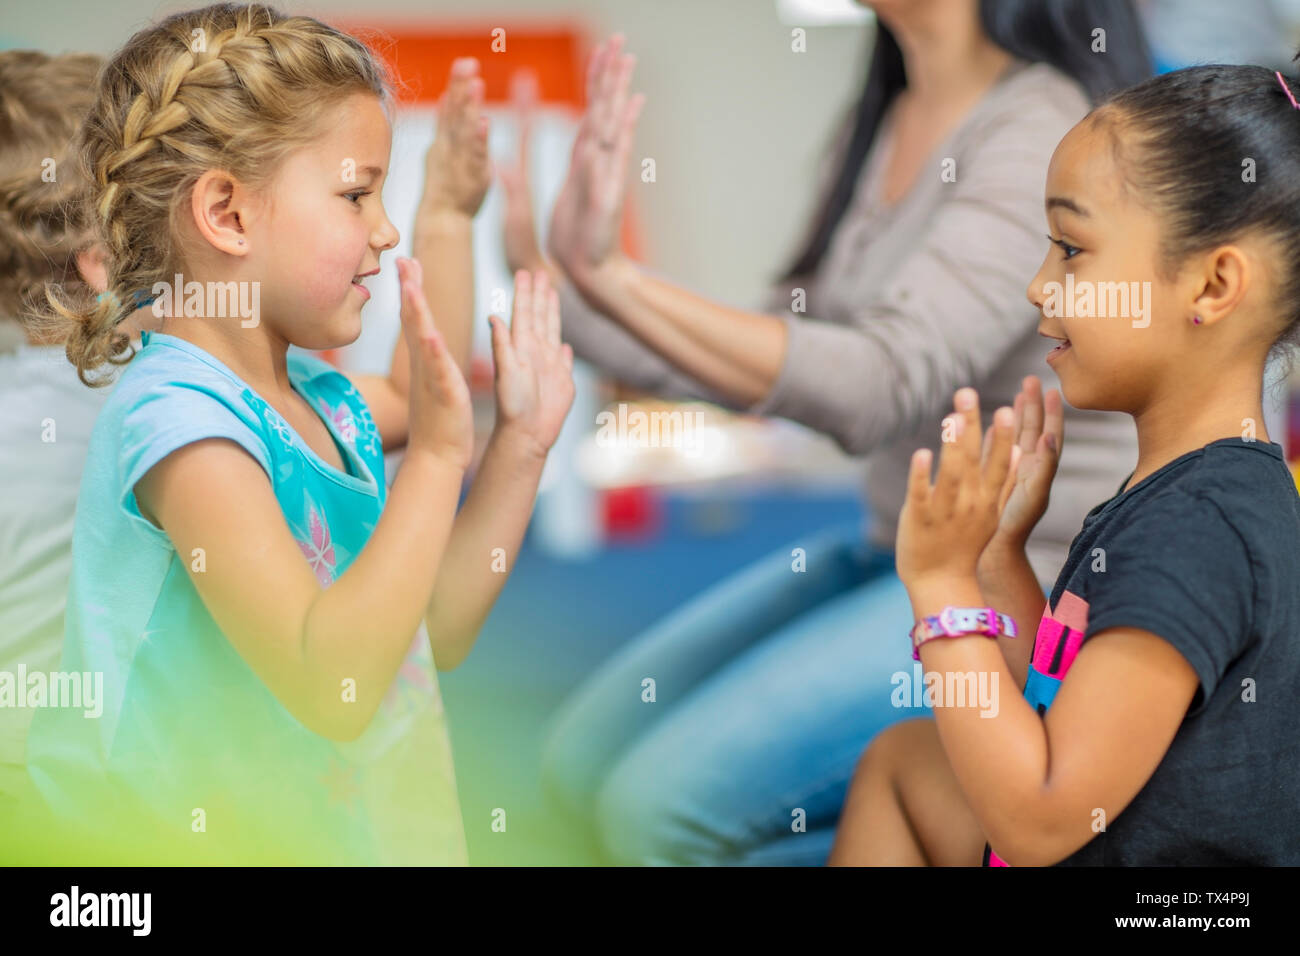 10 Classic hand-clapping games to teach your kid - Today's Parent